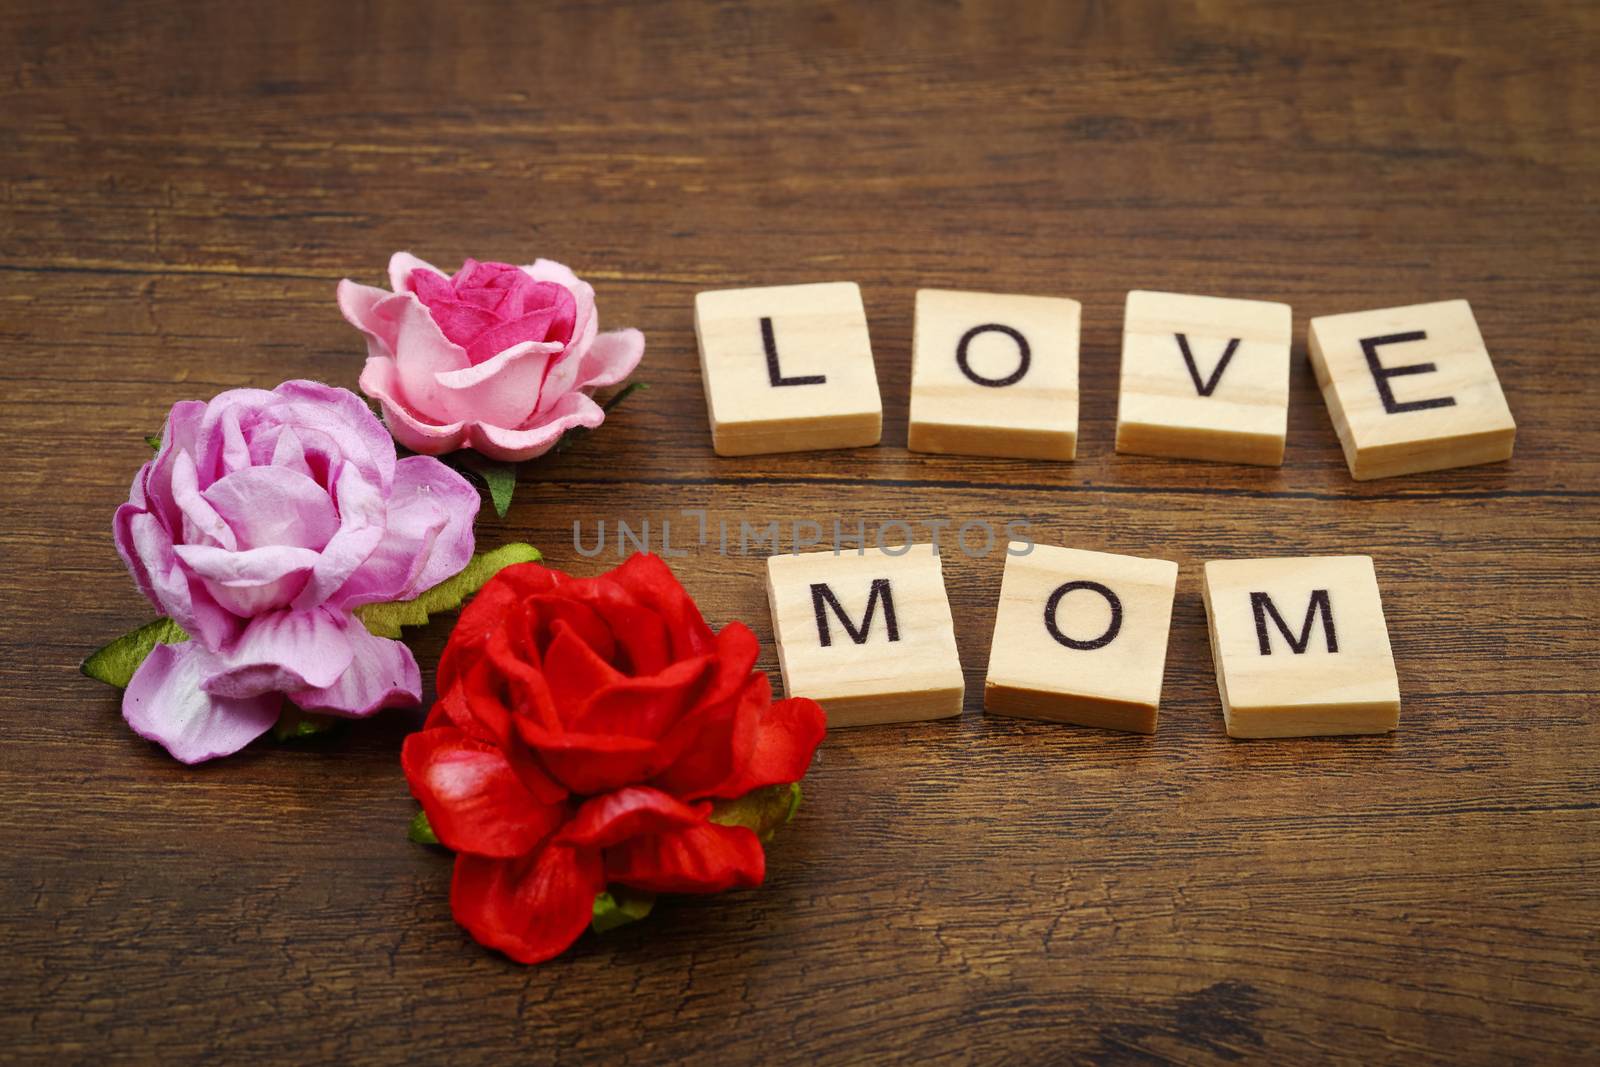 Love mom wording with rose flowers mother's day concept. by phalakon